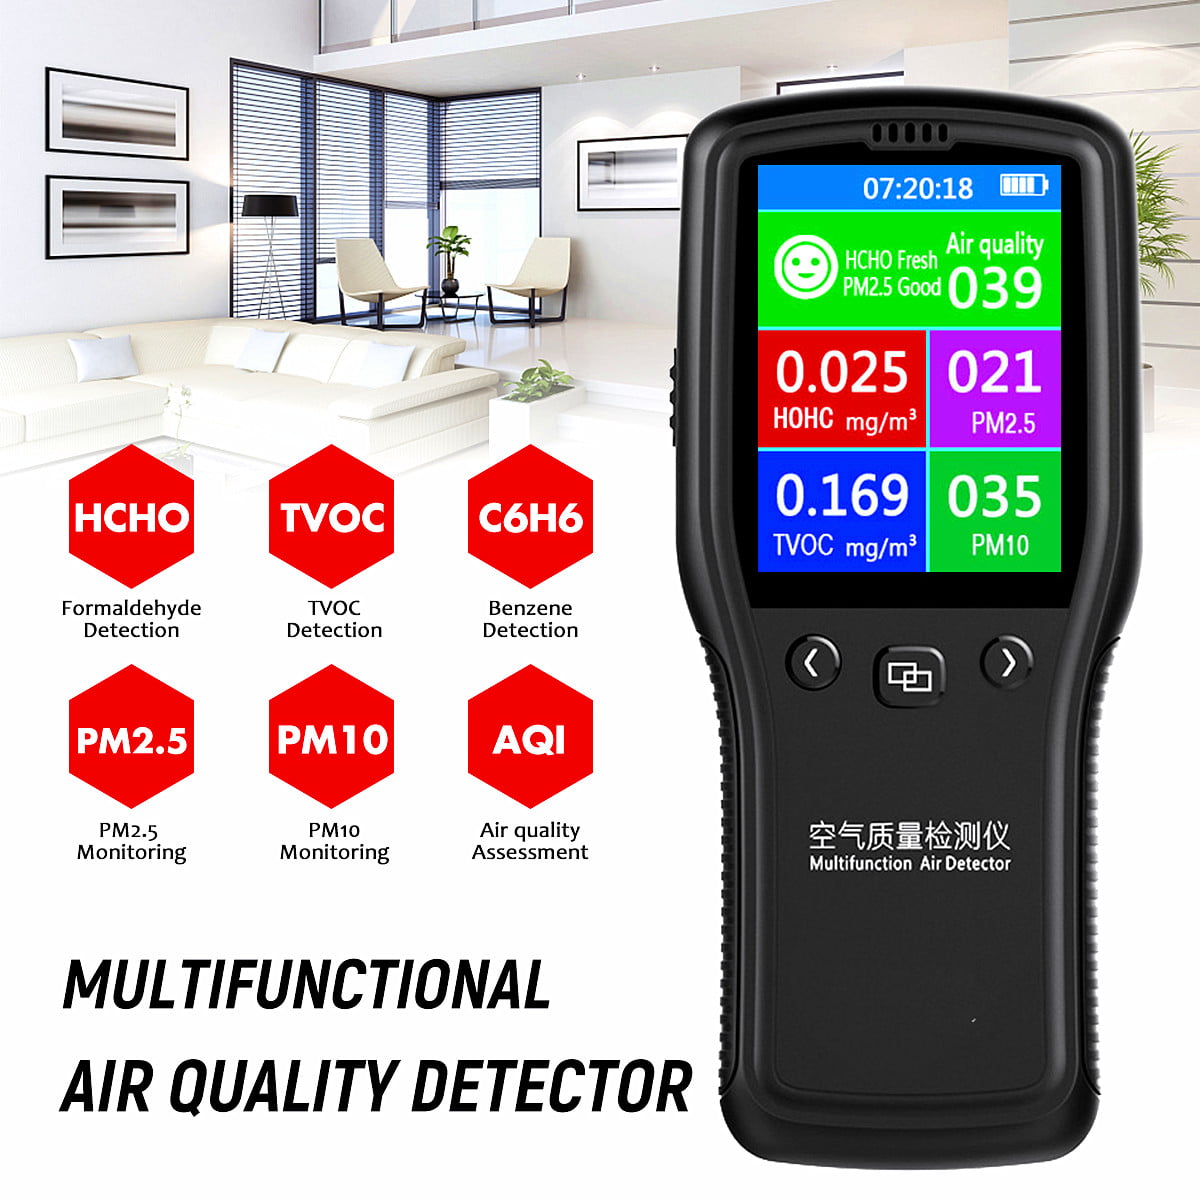 Romantic PresentFormaldehyde Monitor Air C6H6 Monitoring Formaldehyde Detector High Accuracy Temperature Monitor 3 Inch Screen for Conference Room Office 